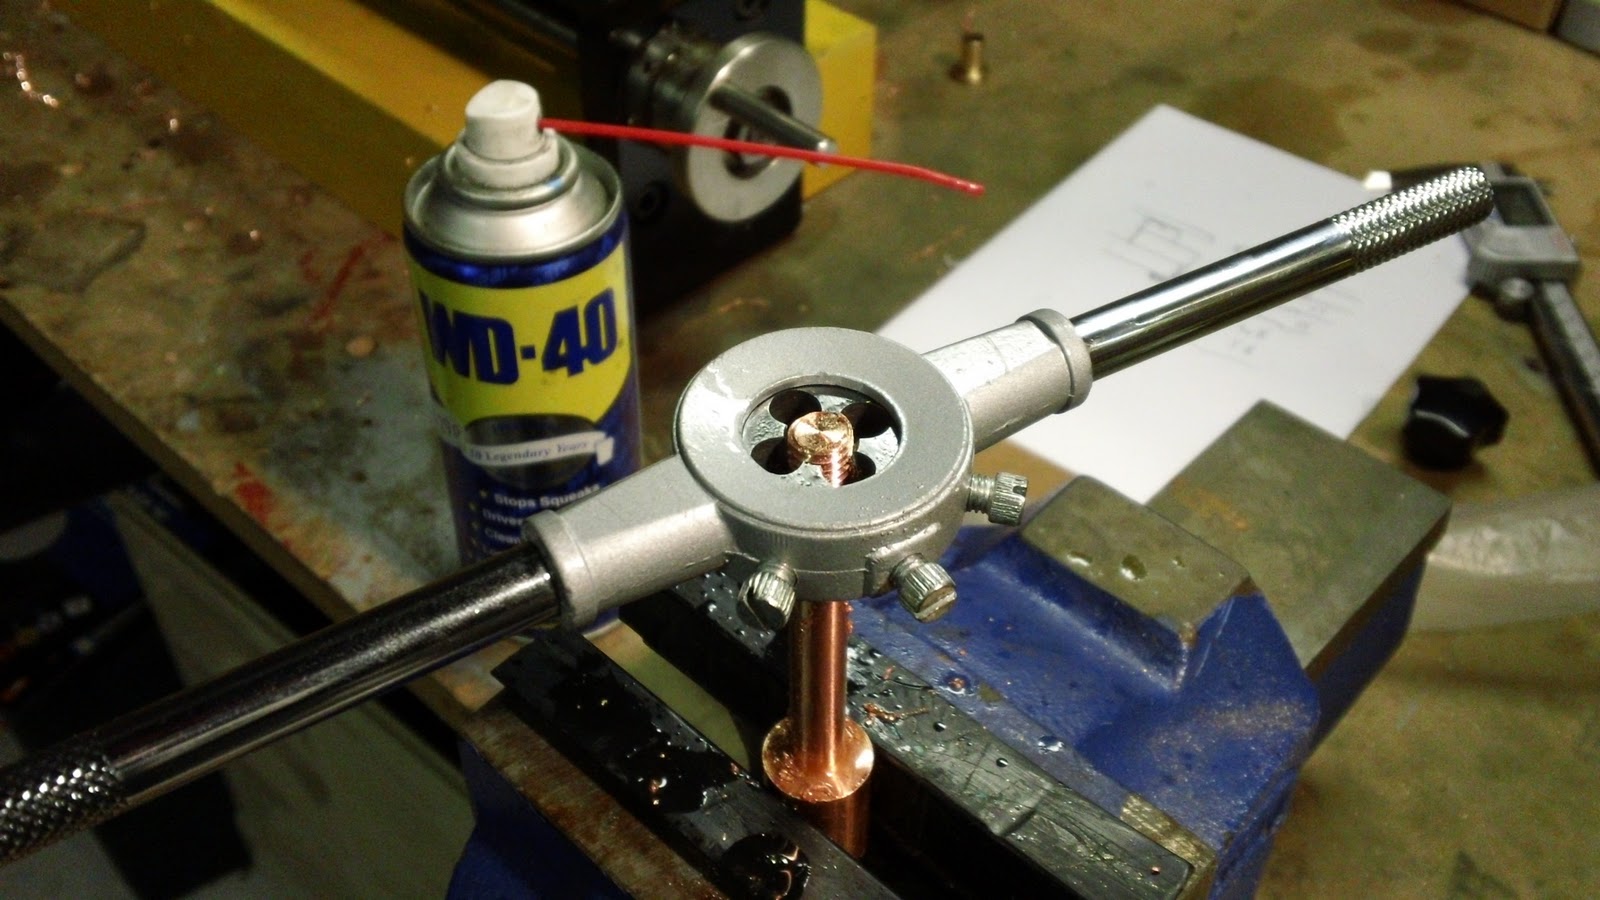 Paul's Tesla Coil Blog: Attaching the Toroid to the Secondary Coil